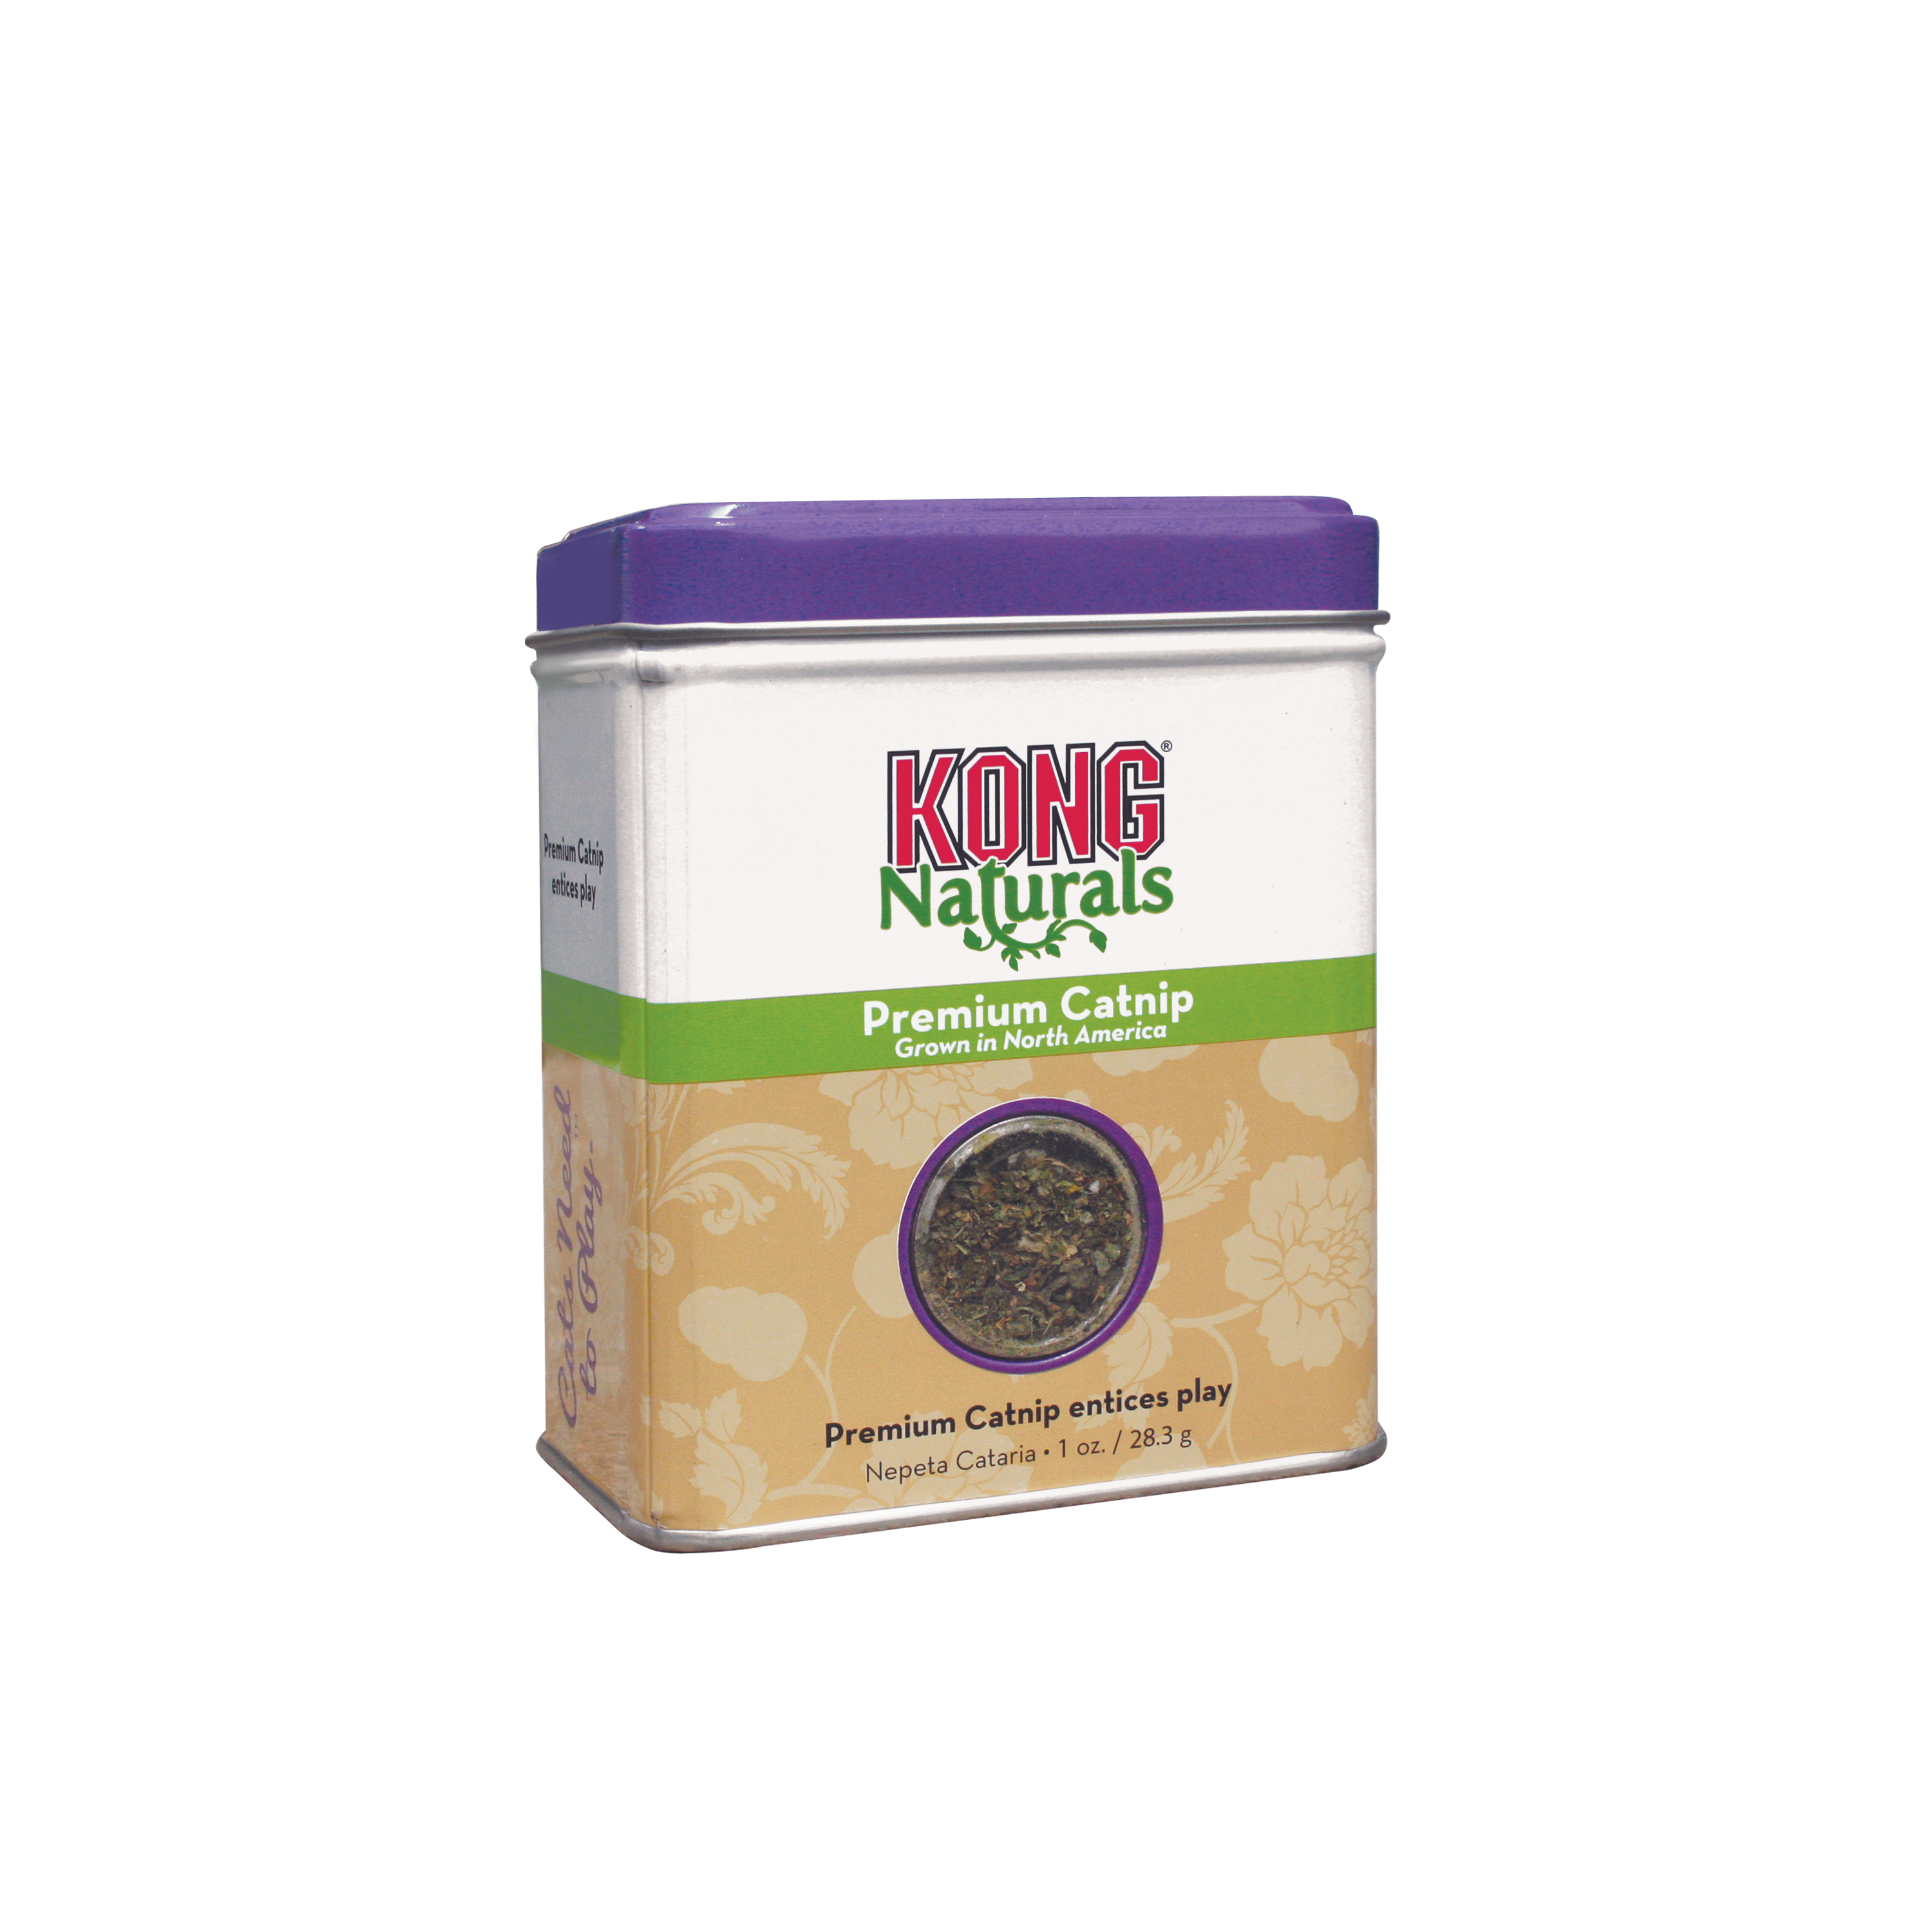 Naturals Catnip offpack product image